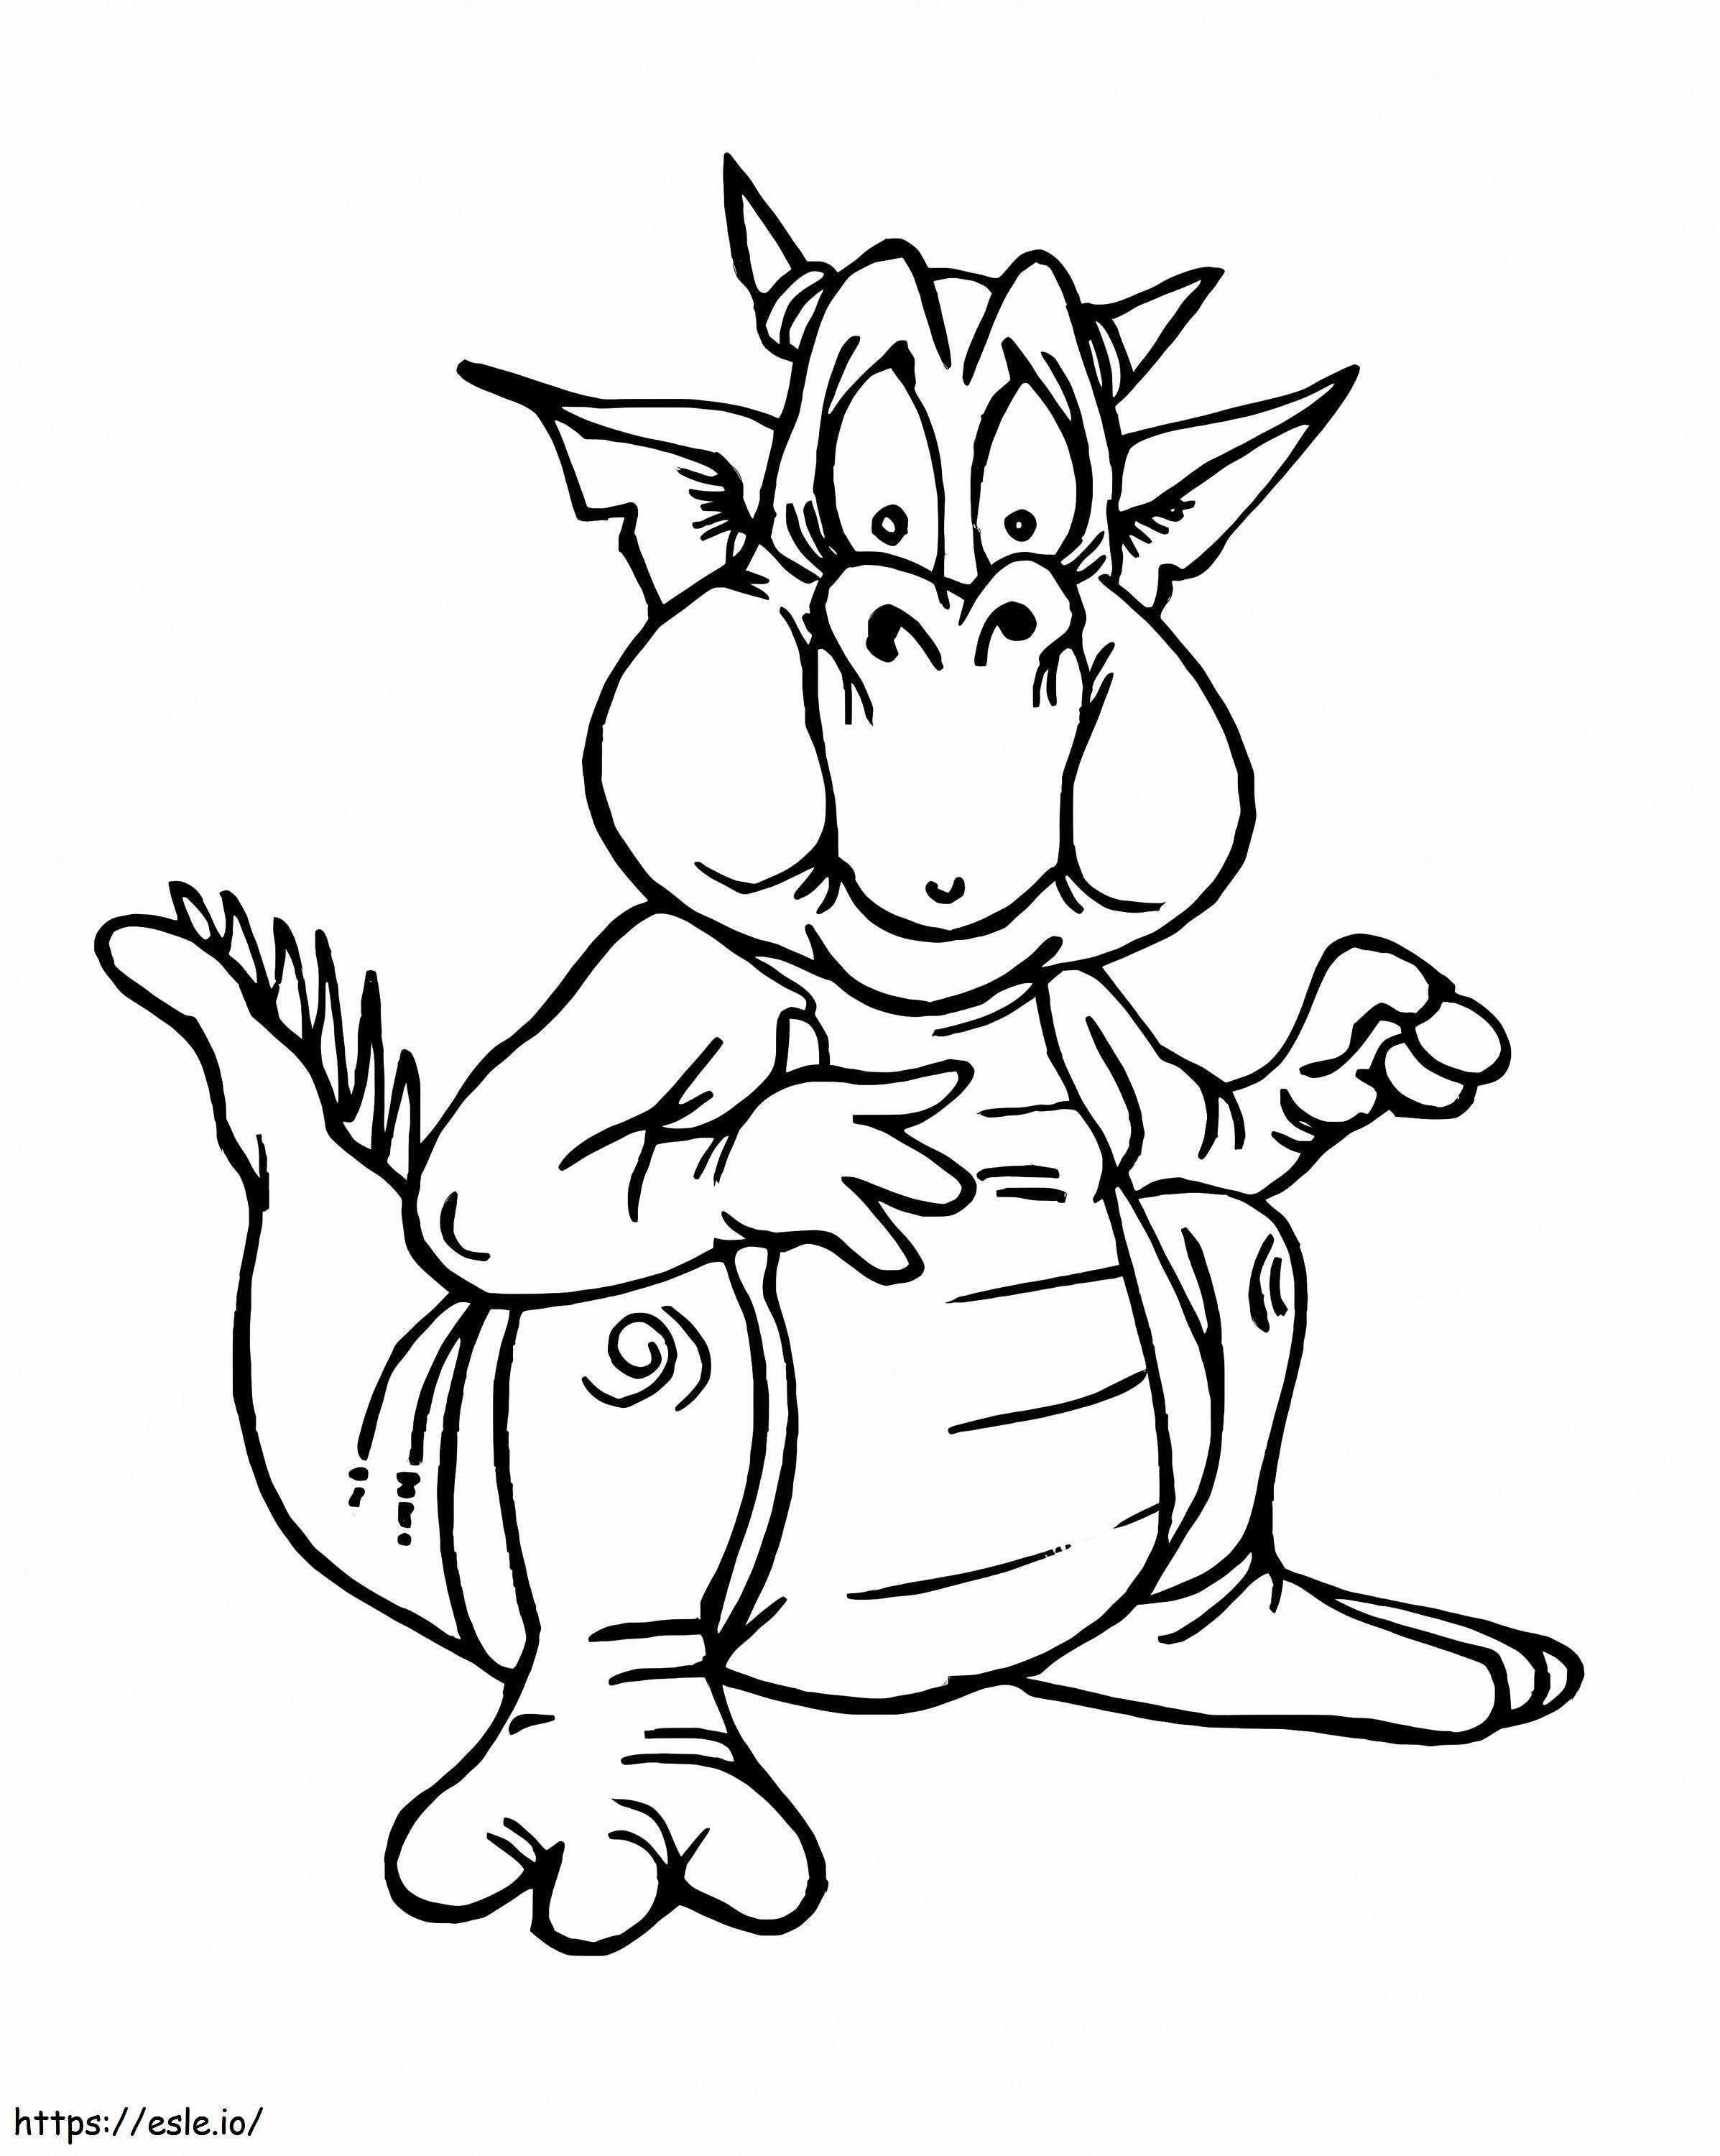 Ugly Dragon coloring page